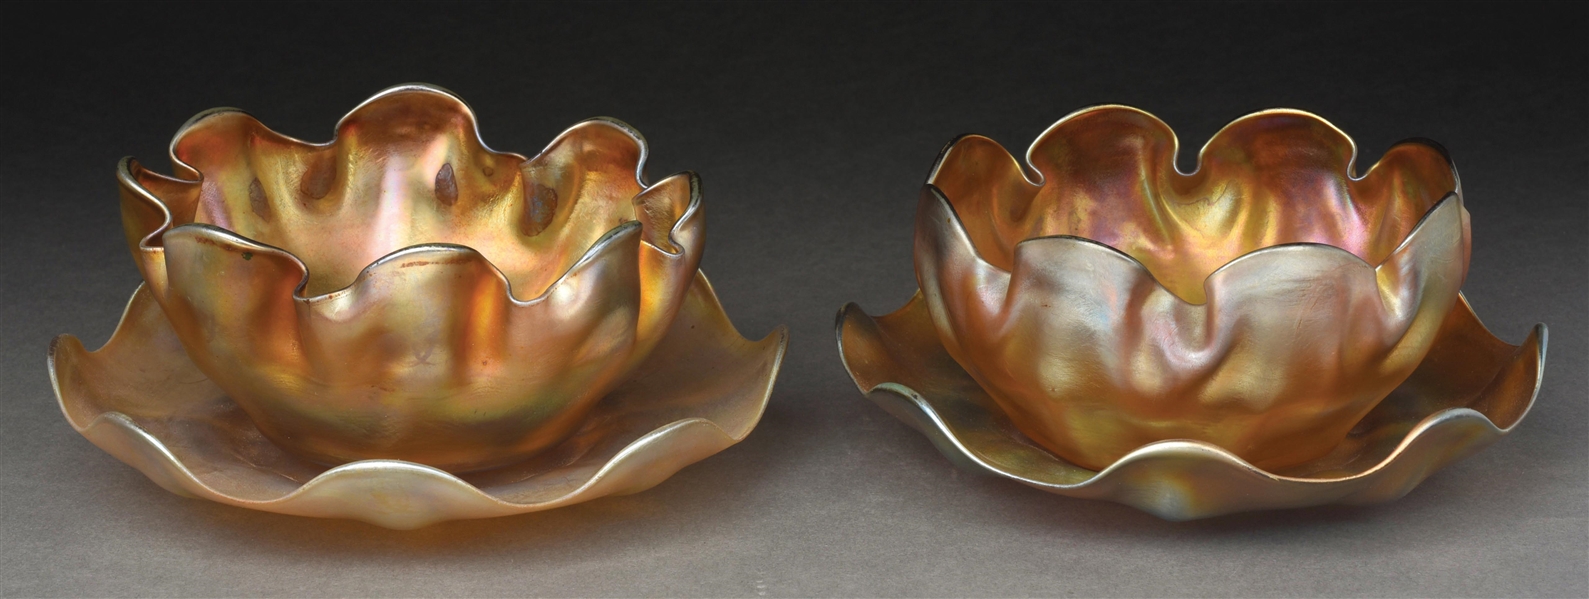 PAIR OF TIFFANY GOLD FAVRILE CRIMPED RIM FINGER BOWLS WITH UNDERPLATES.